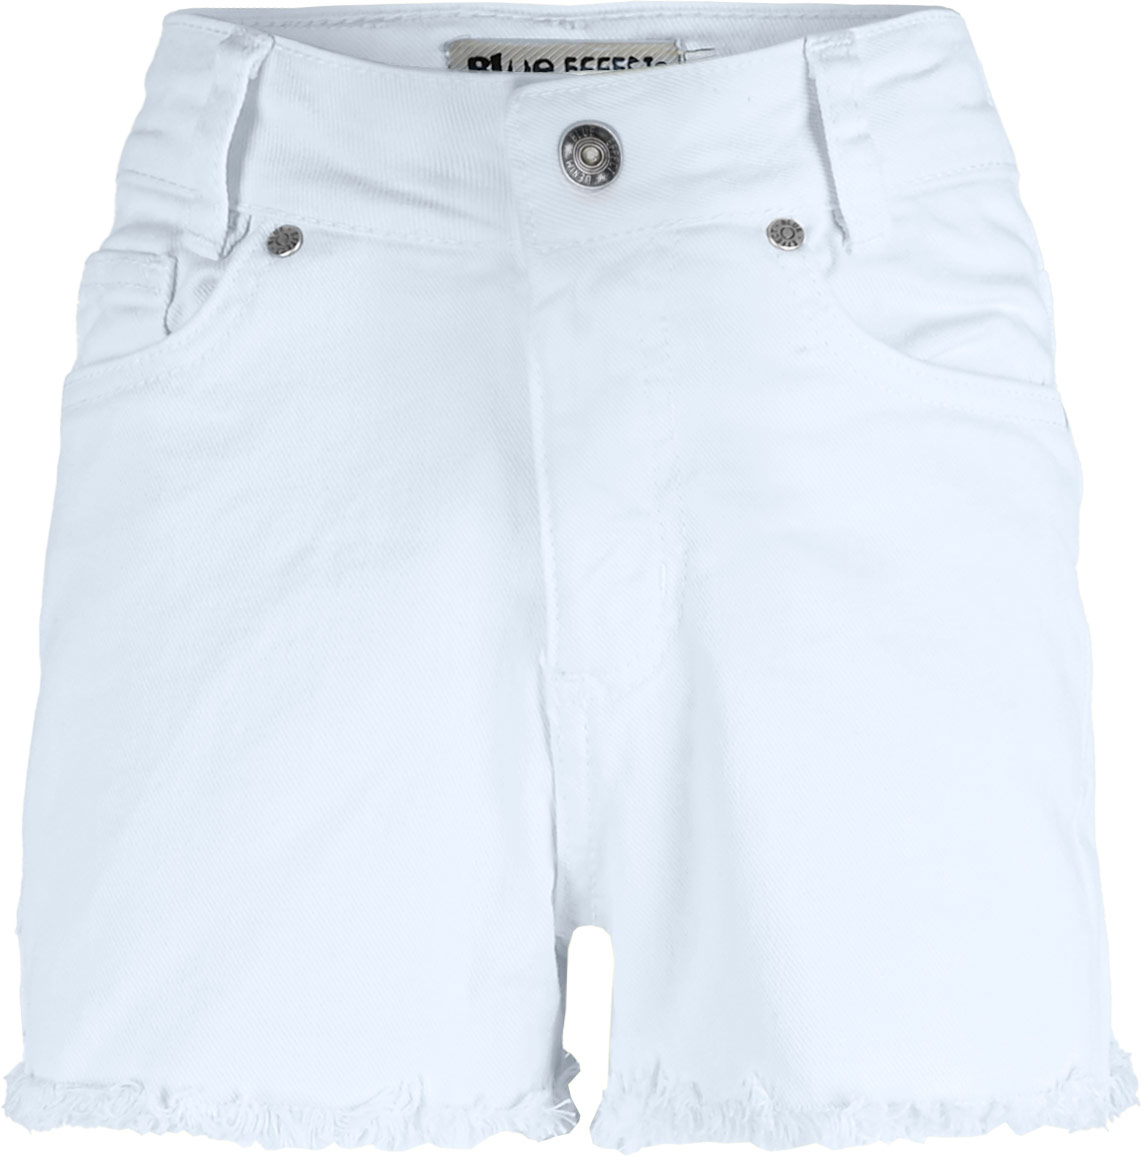 3309-Girls High-Waist Short available in Normal